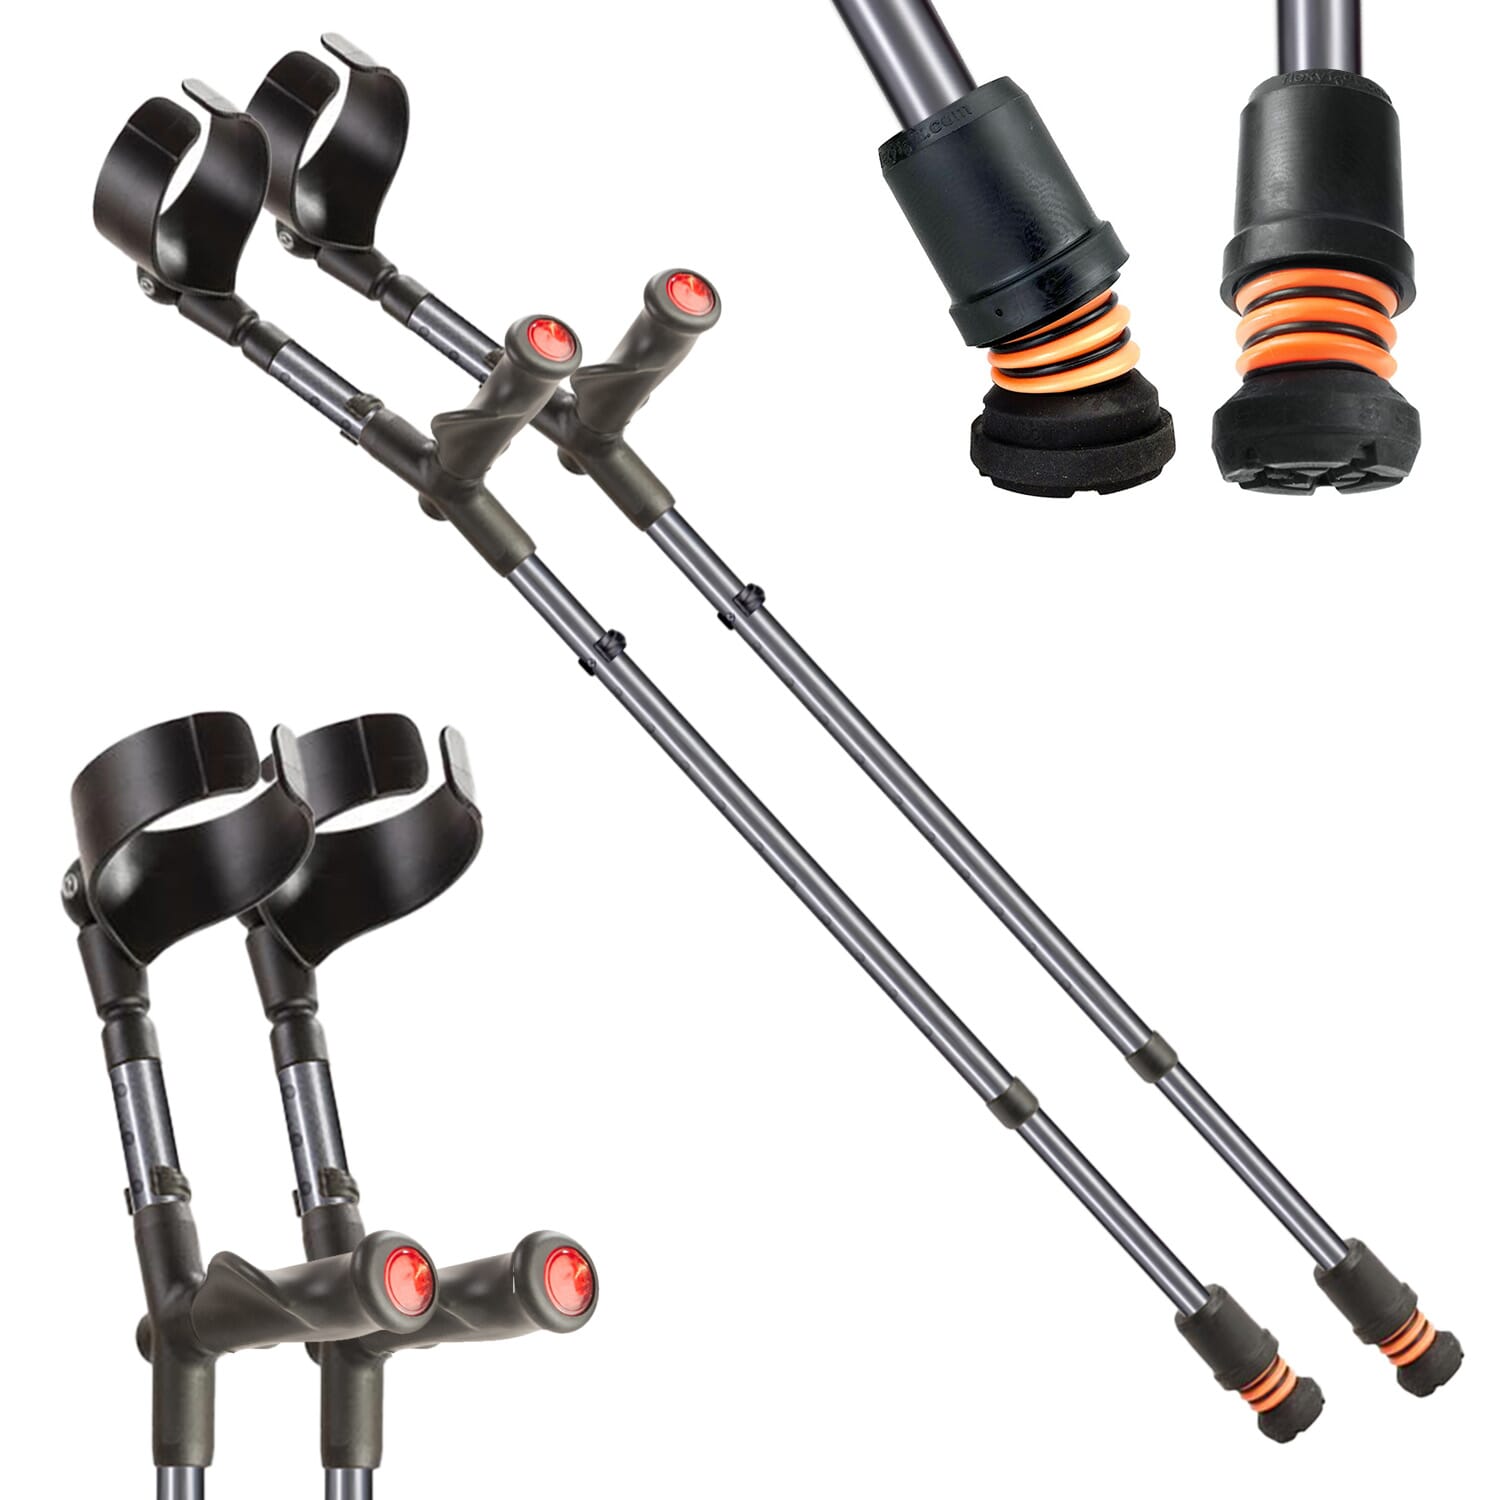 View Flexyfoot Comfort Grip Double Adjustable Crutches Grey Pair information